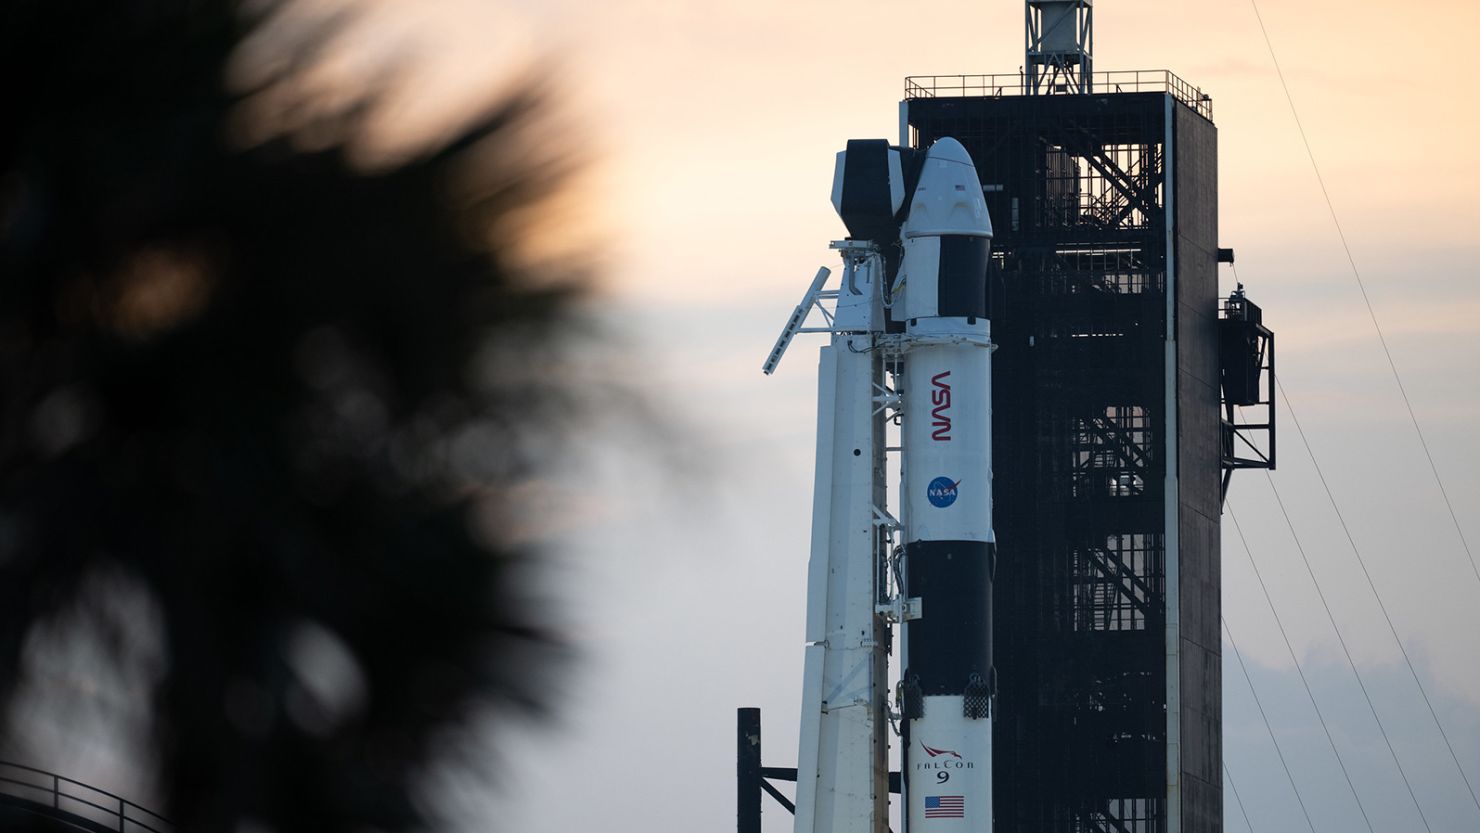 SpaceX, NASA delay astronaut launch for 'additional analysis